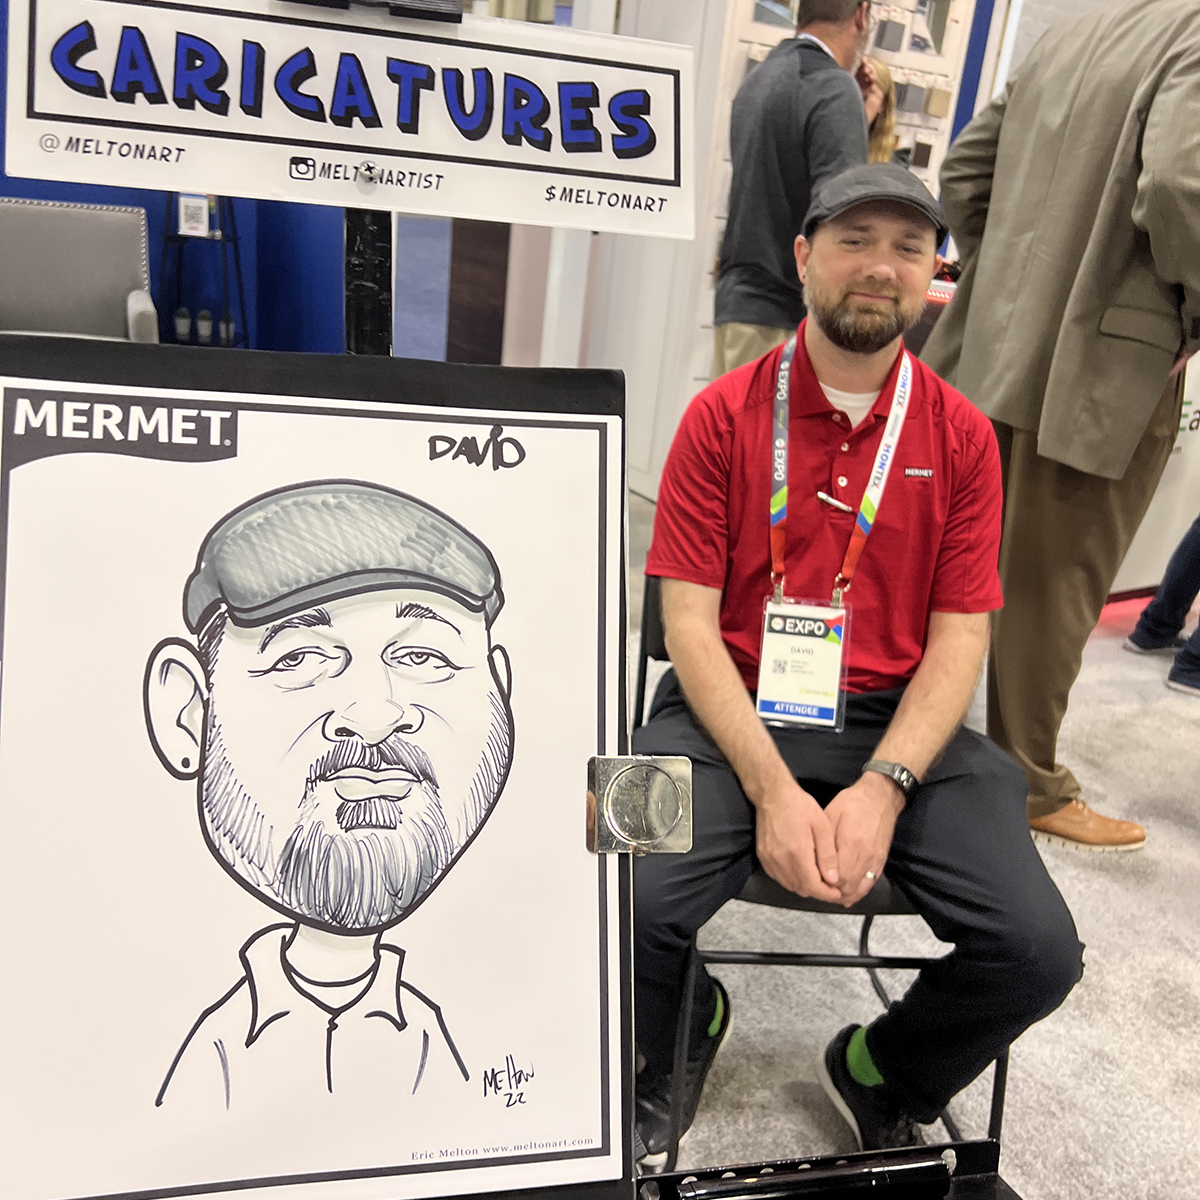 Trade show booth visitor gets drawn by the caricature guy.